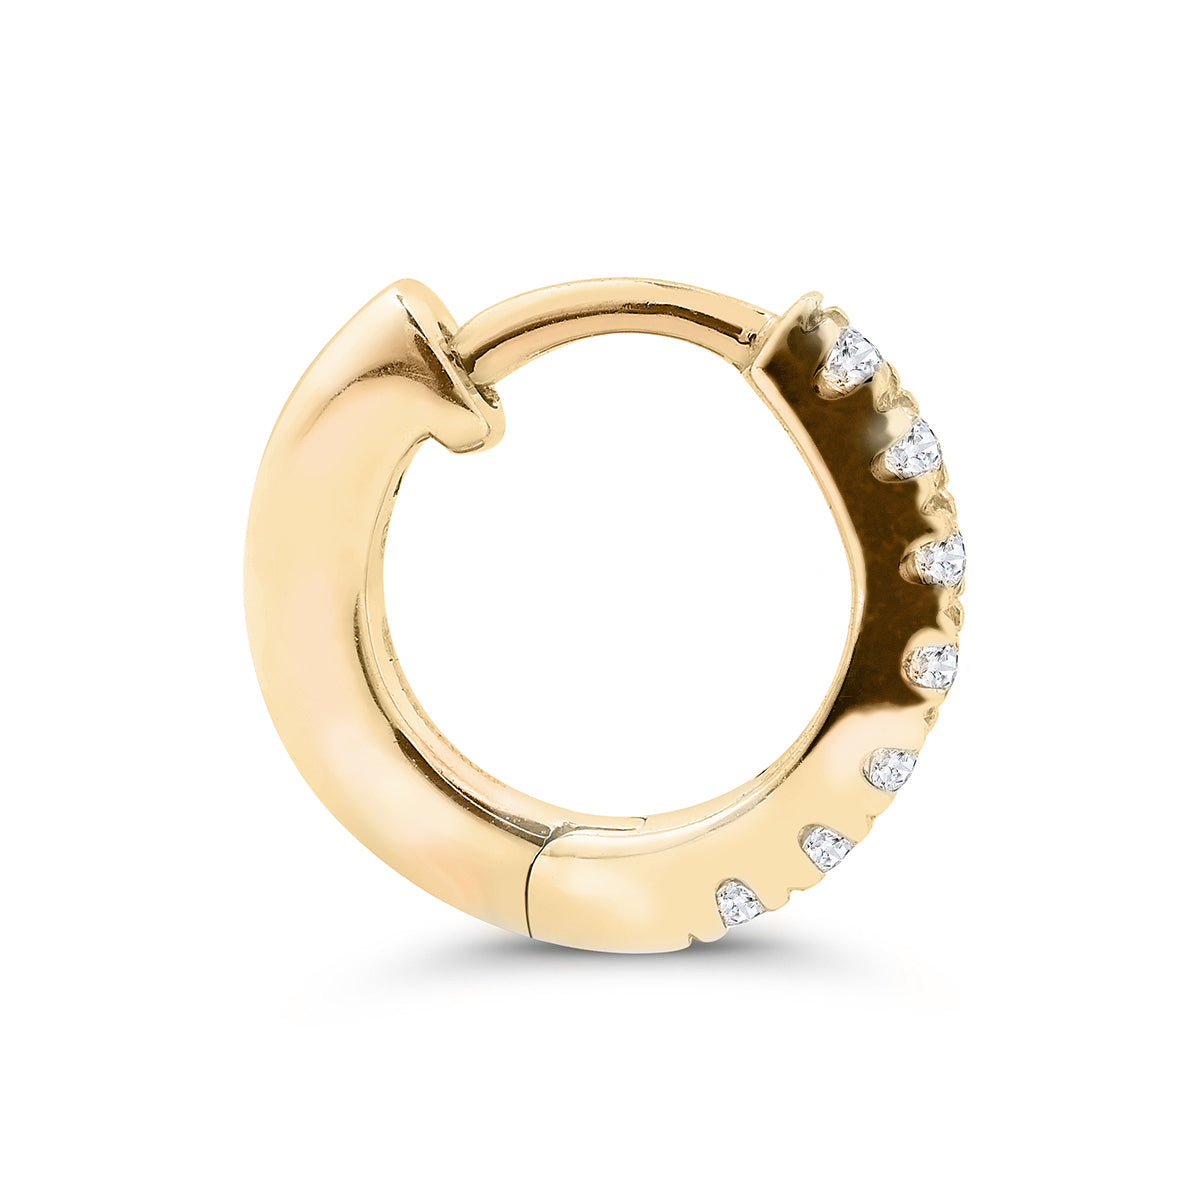 Pave-All-Day Hoops in 14K Gold